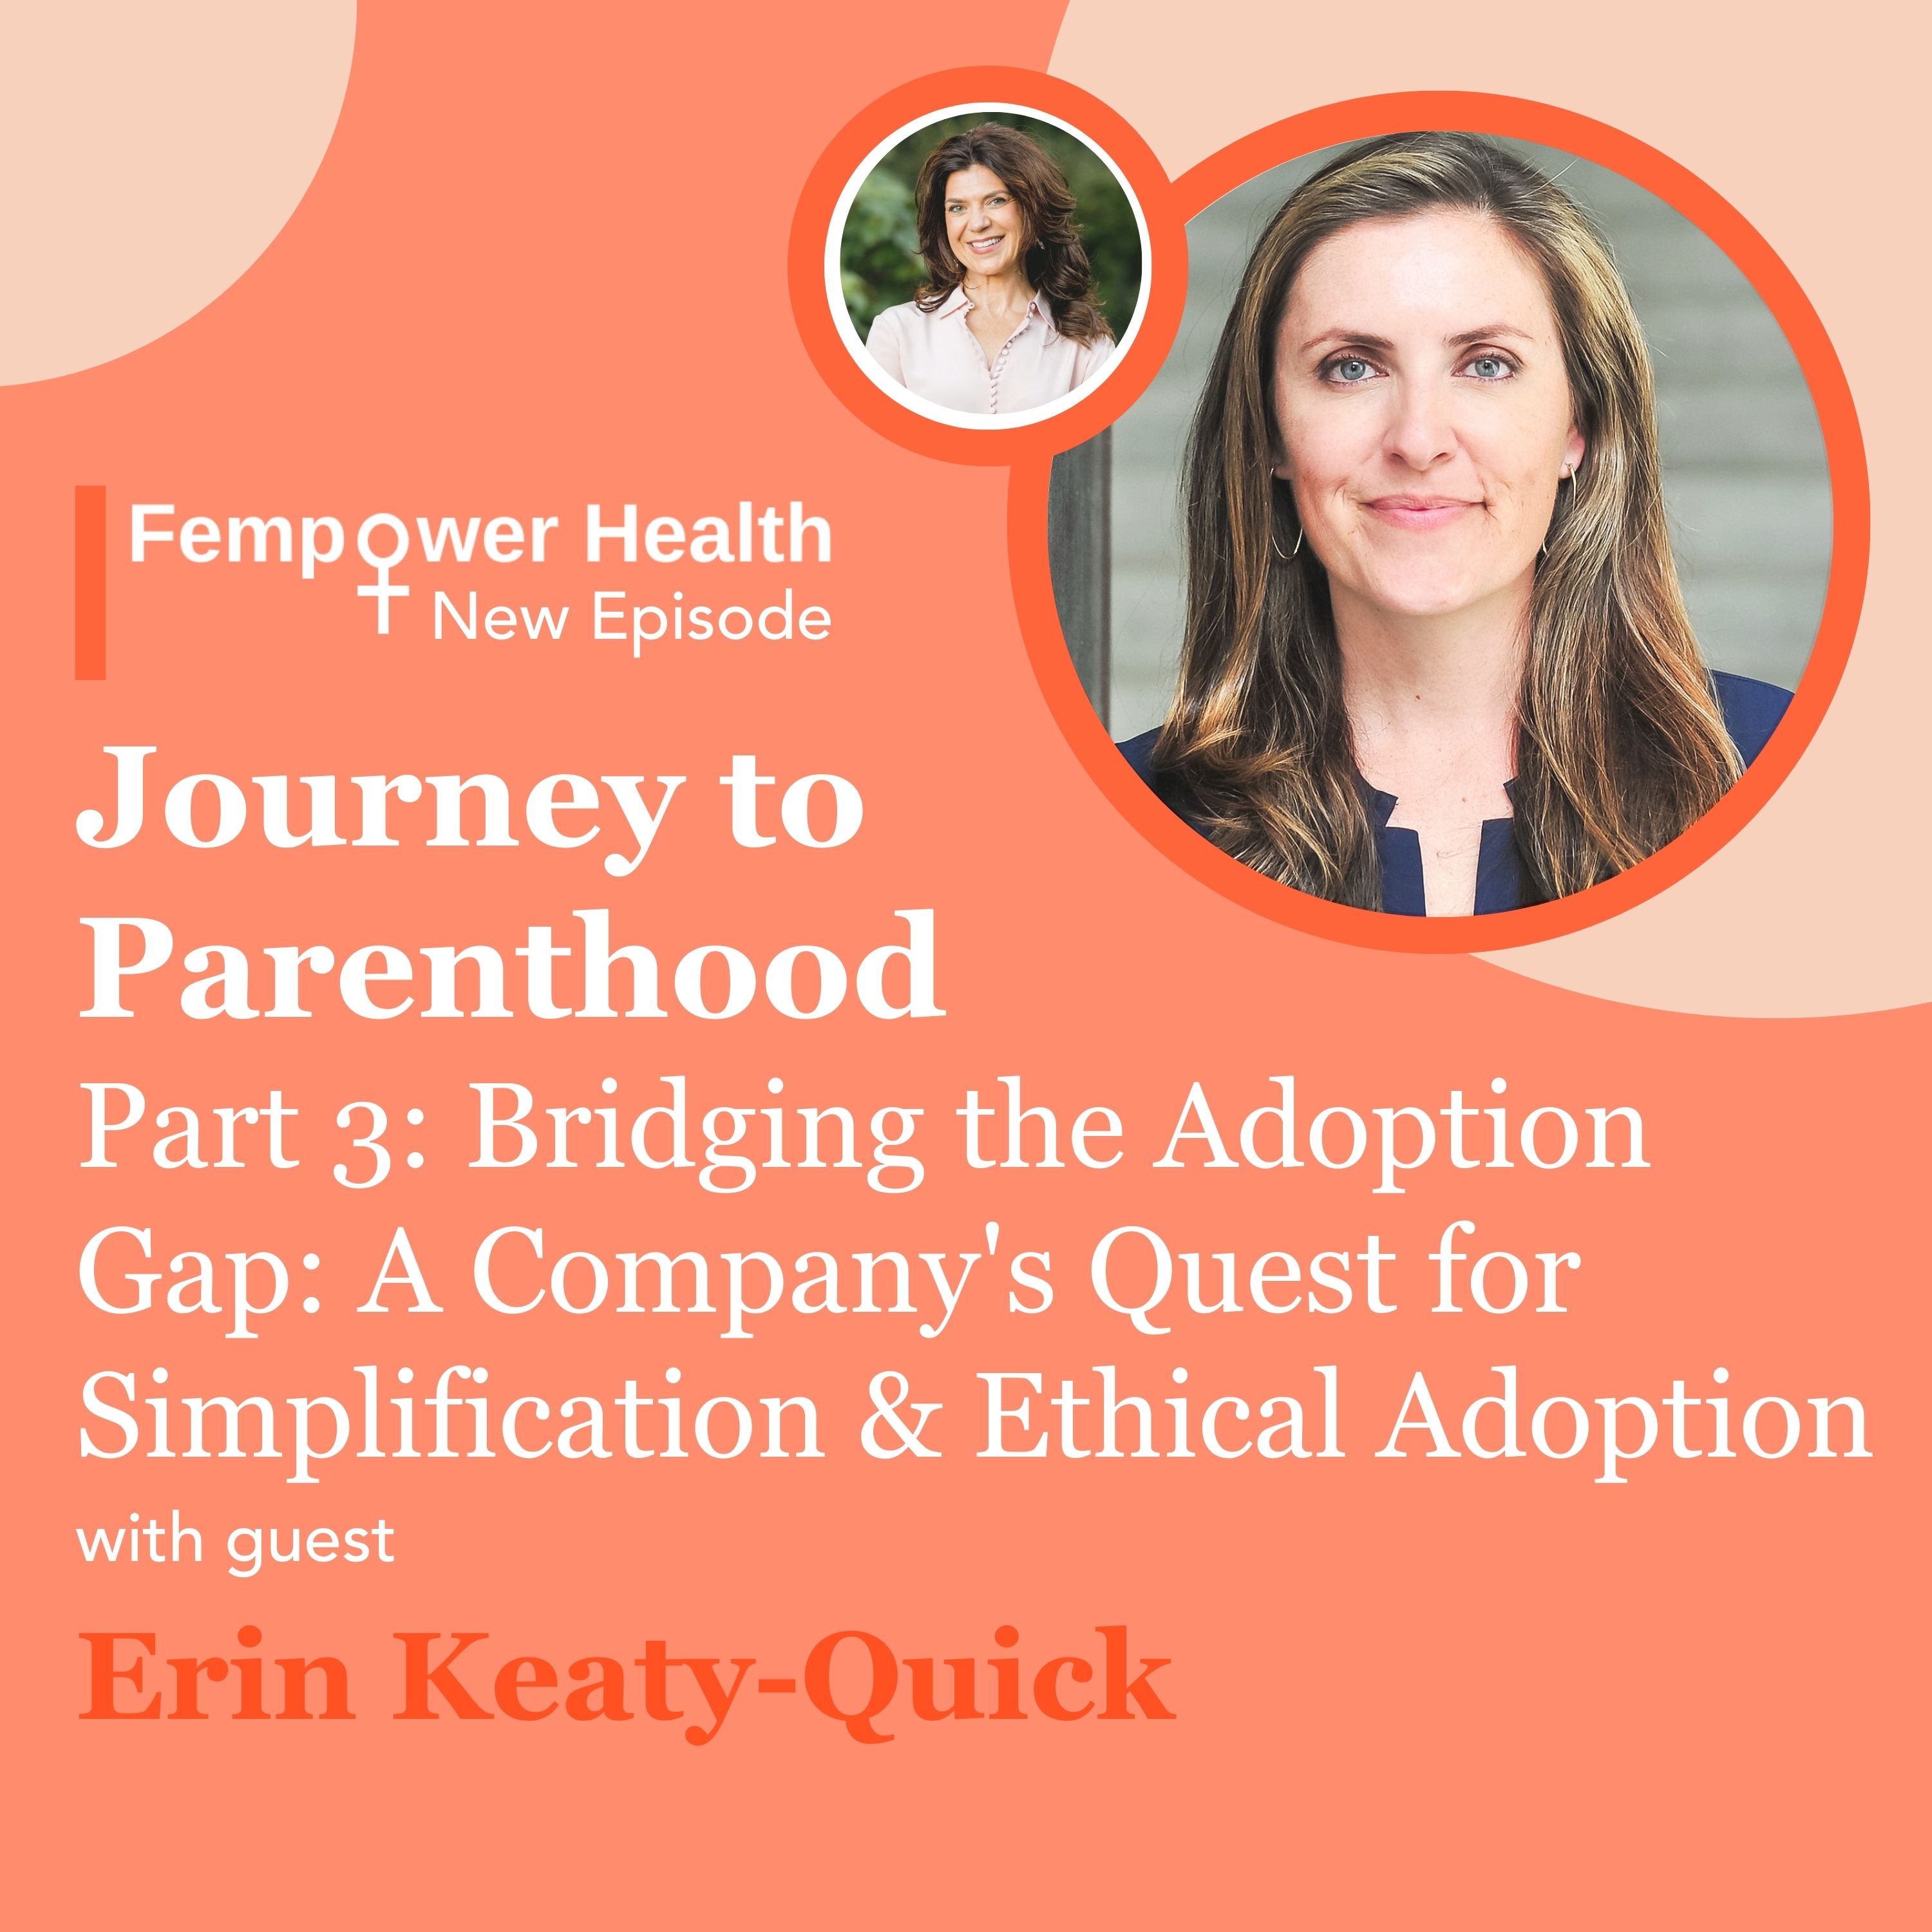 The Journey to Parenthood Series (Part 3): Bridging the Adoption Gap: A Company’s Quest for Simplification & Ethical Adoption | Erin Keaty-Quick